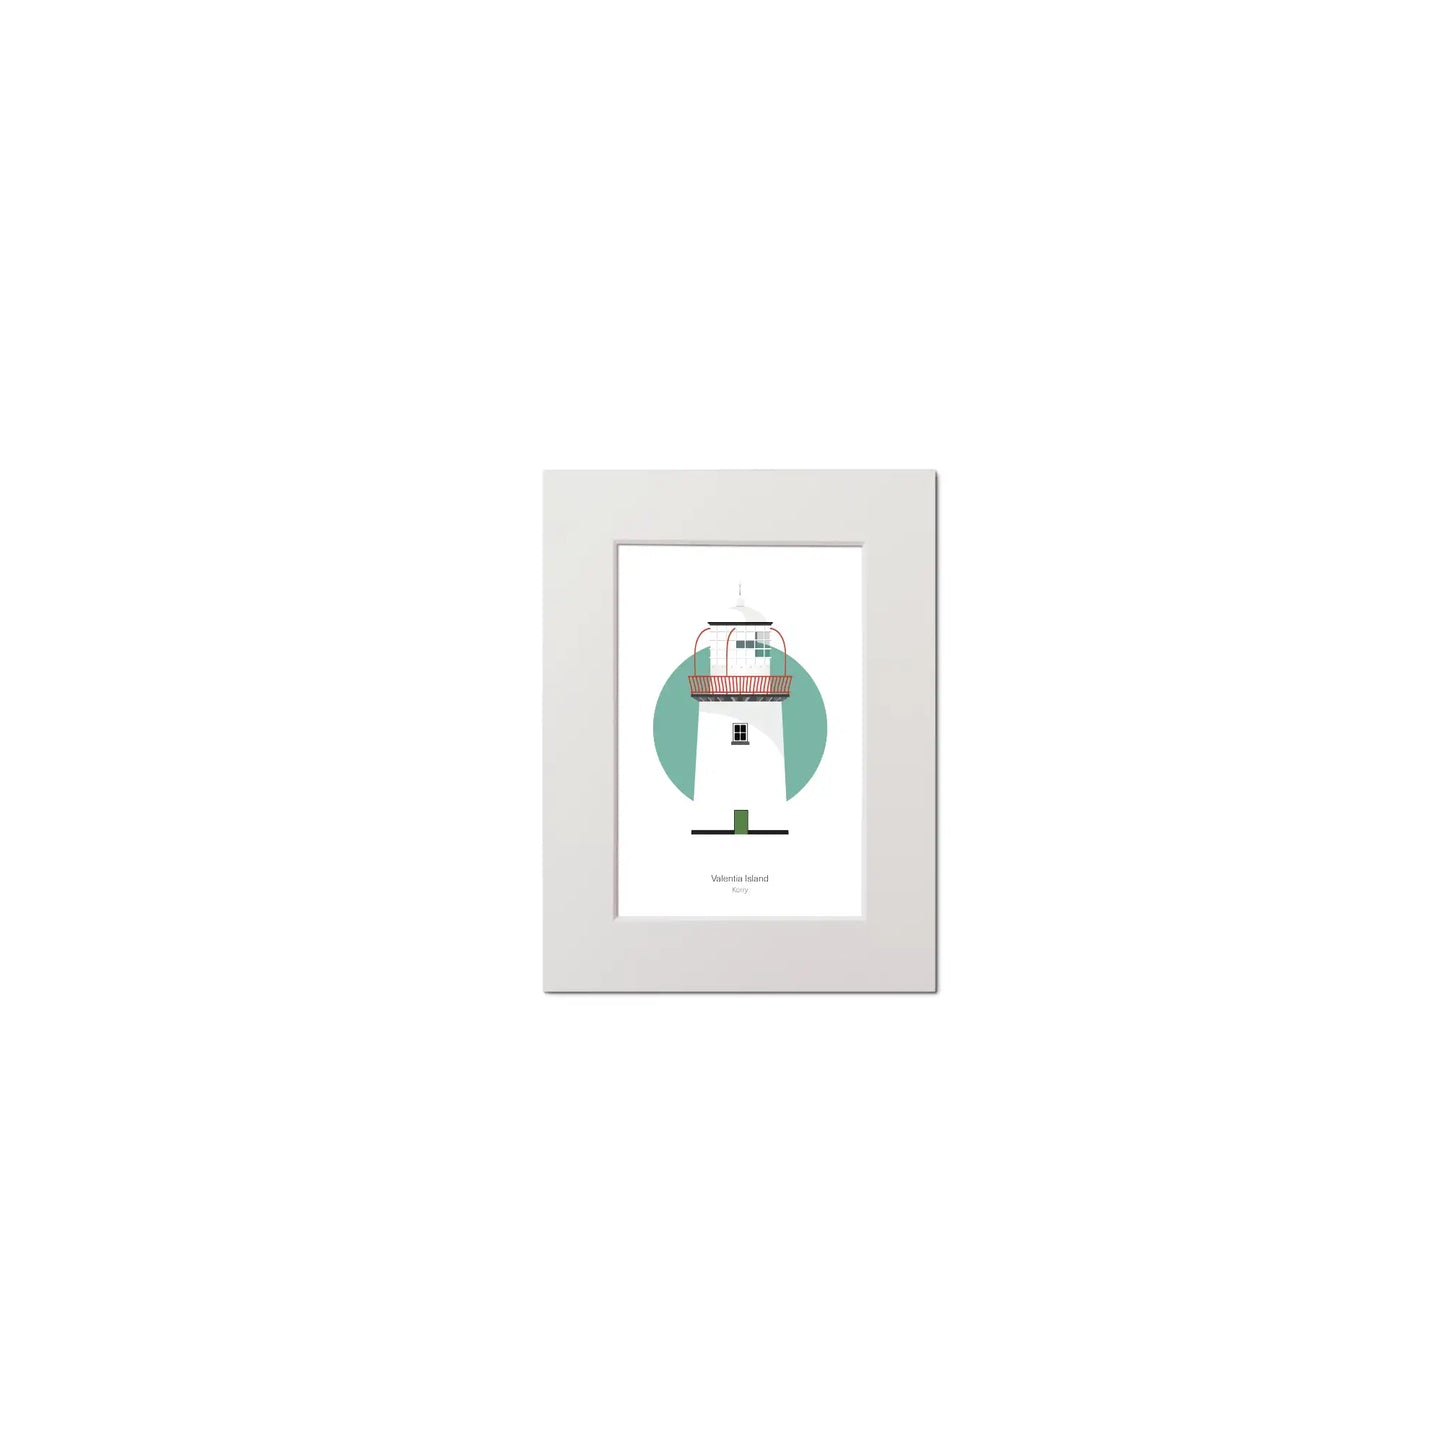 Illustration of Valentia Island lighthouse on a white background inside light blue square, mounted and measuring 15x20cm.